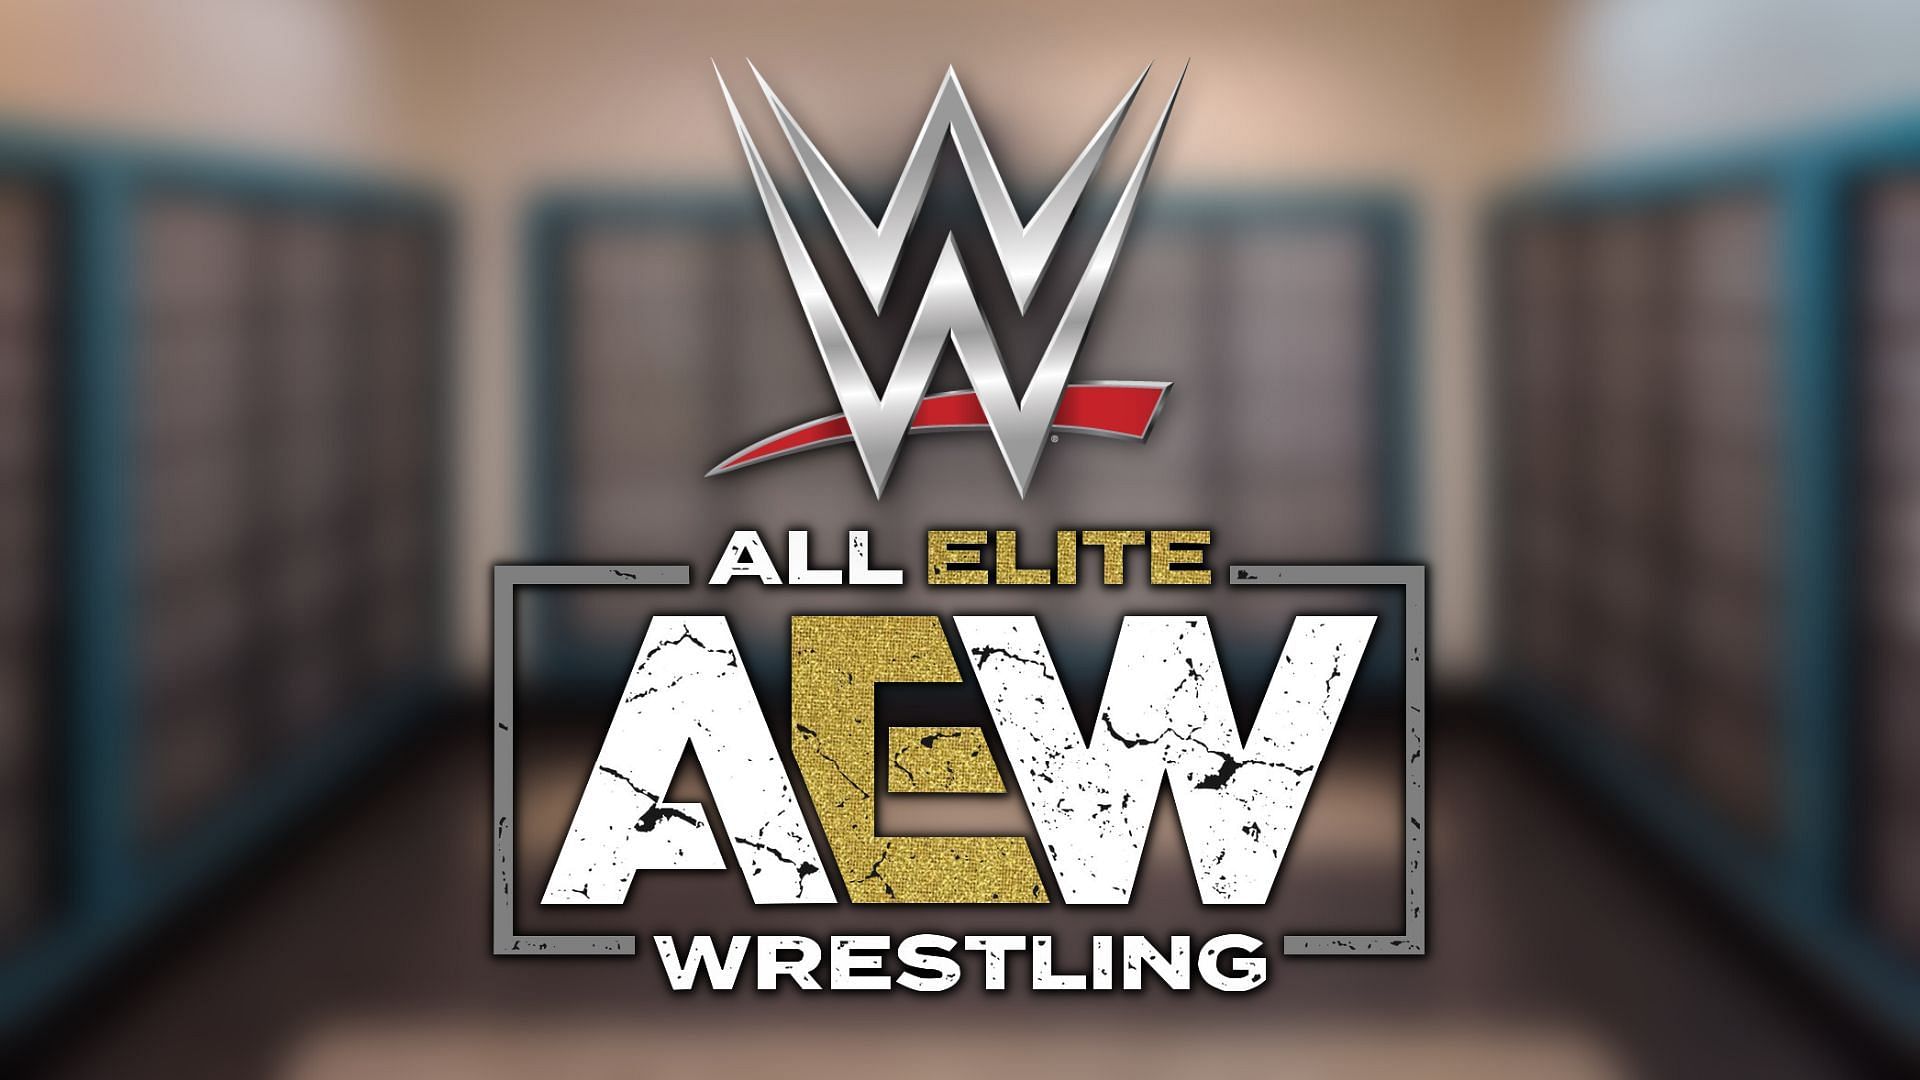 A former WWE Superstar will be returning to AEW in the future